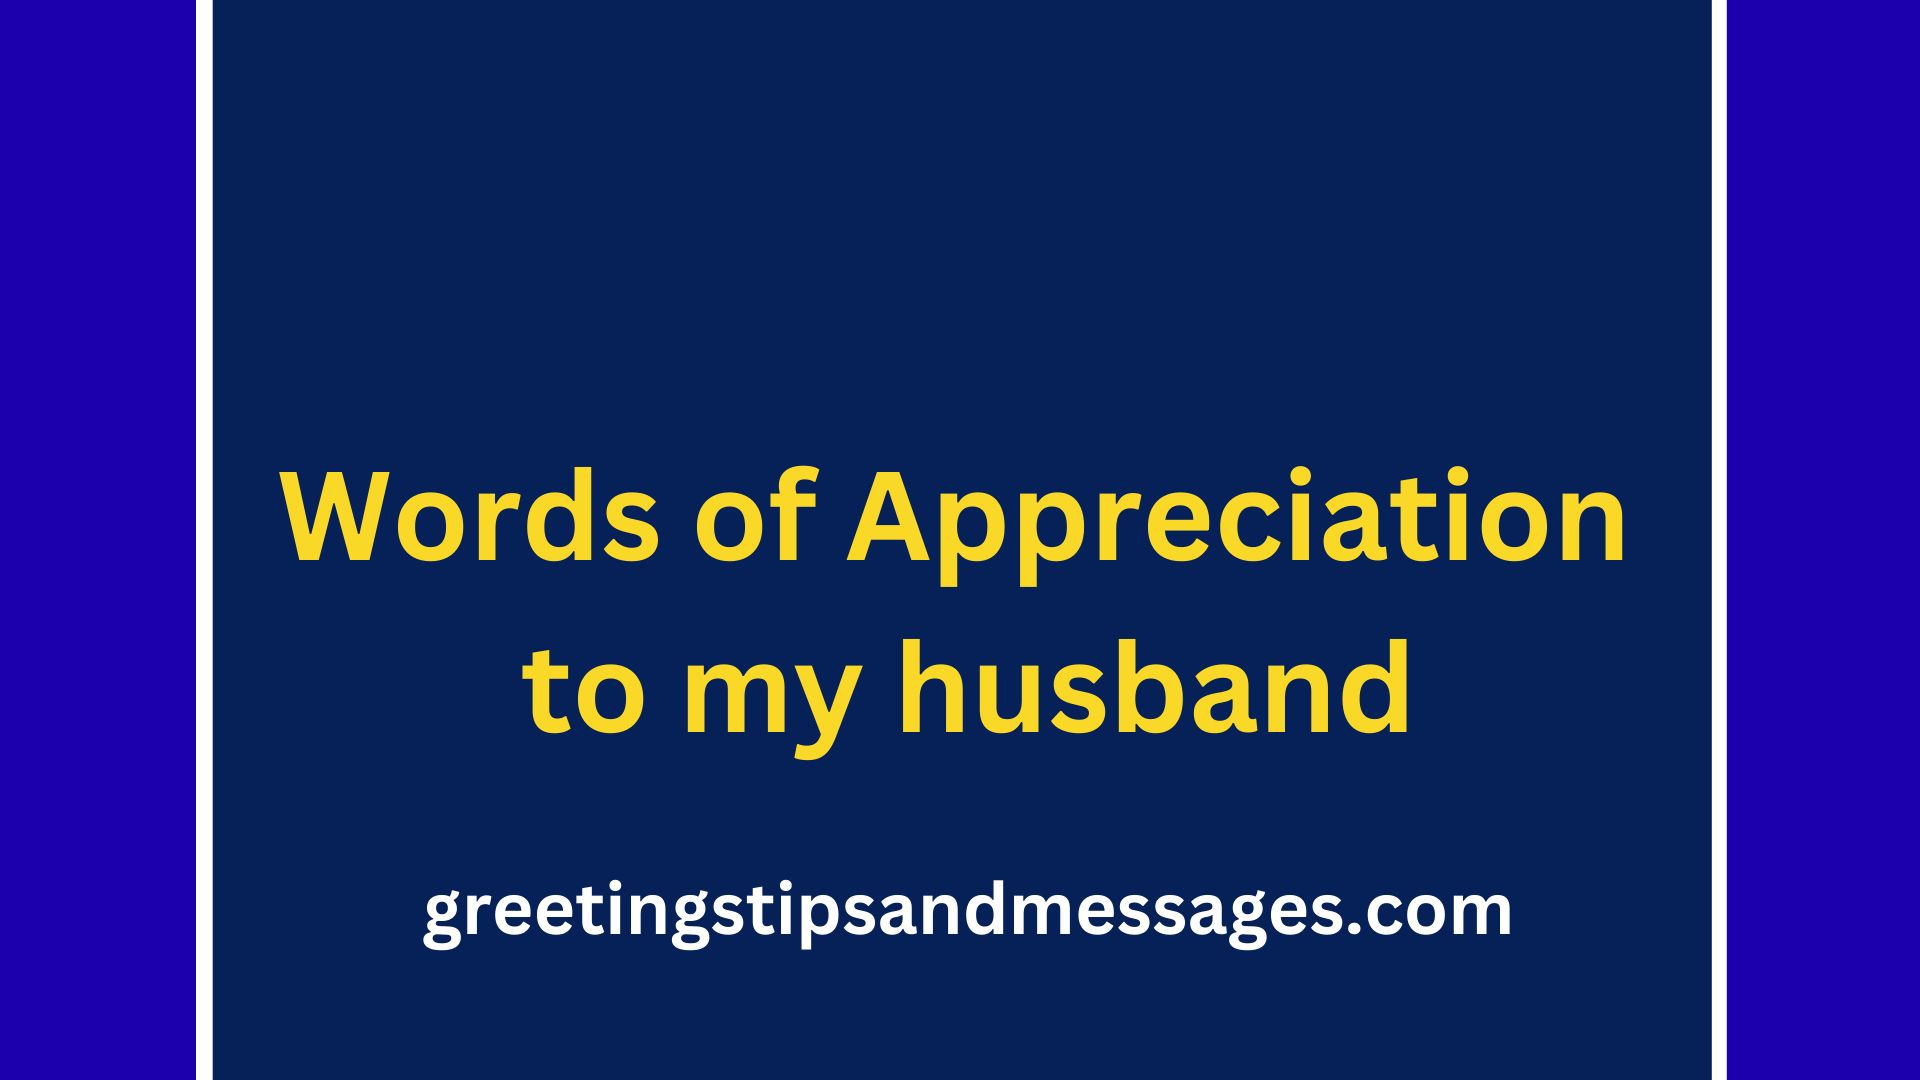 Words of Appreciation to my husband